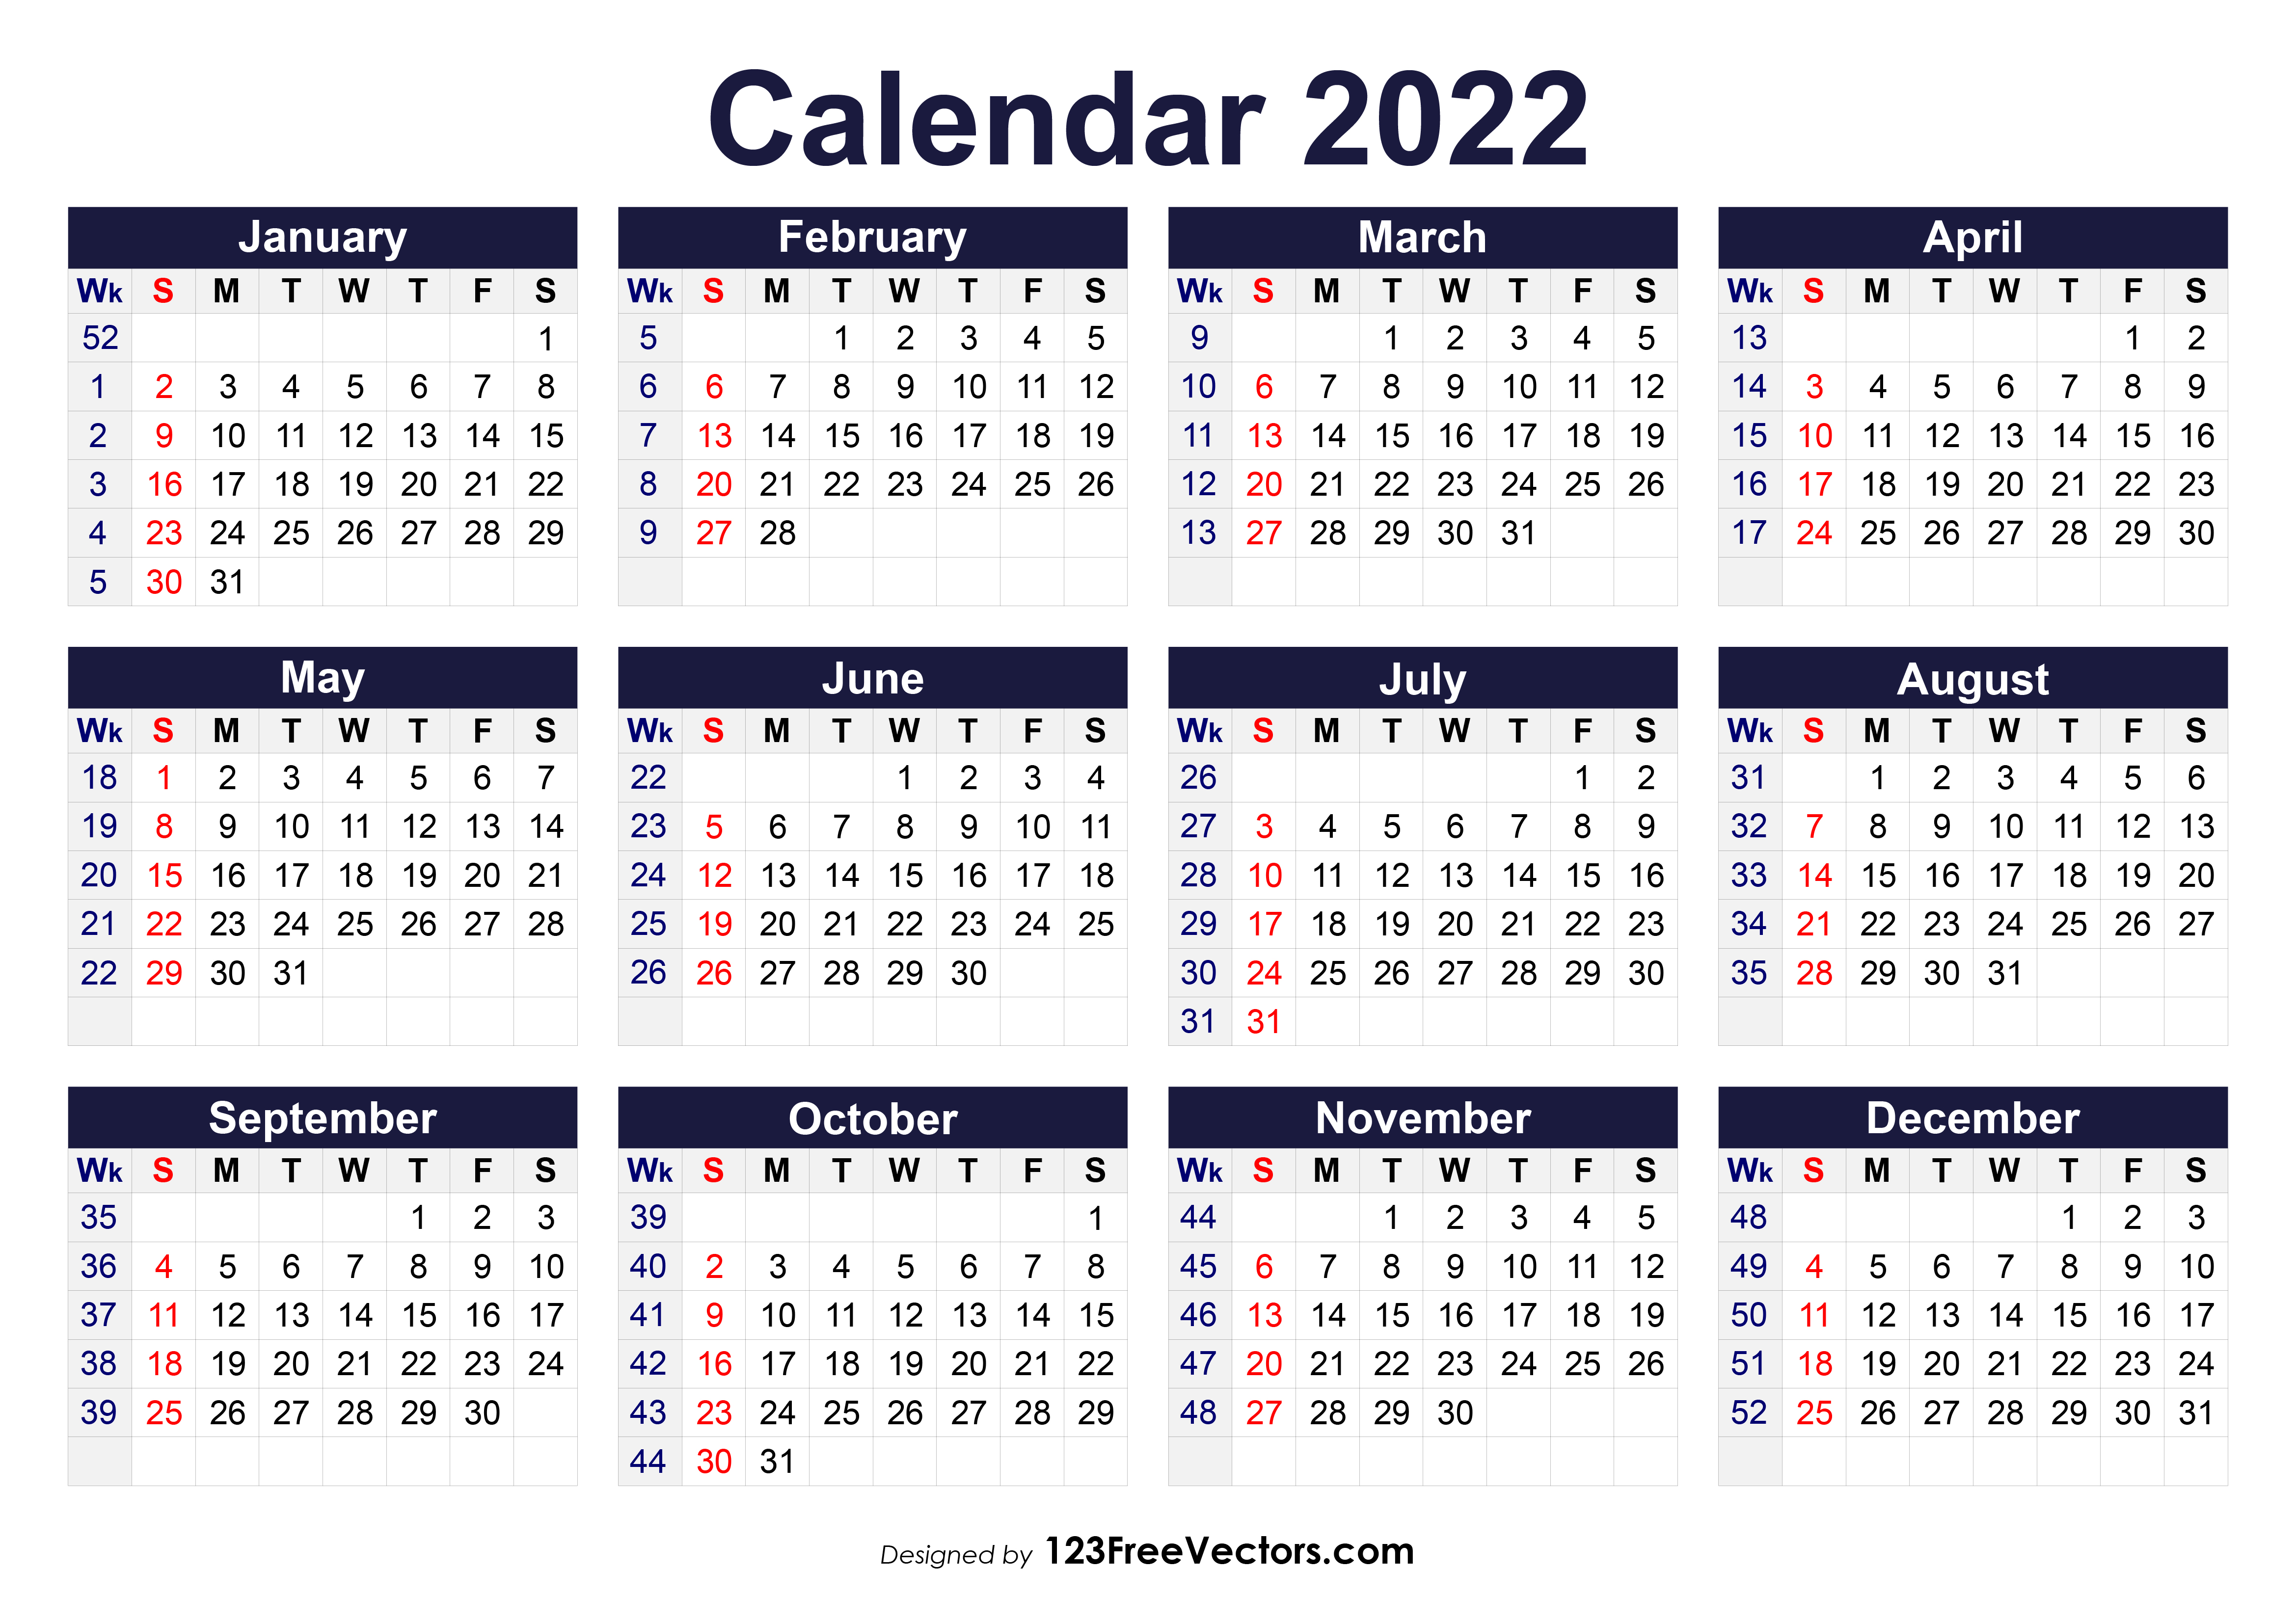 Free 2022 Calendar Mailed To You Free Printable 2022 Calendar With Week Numbers